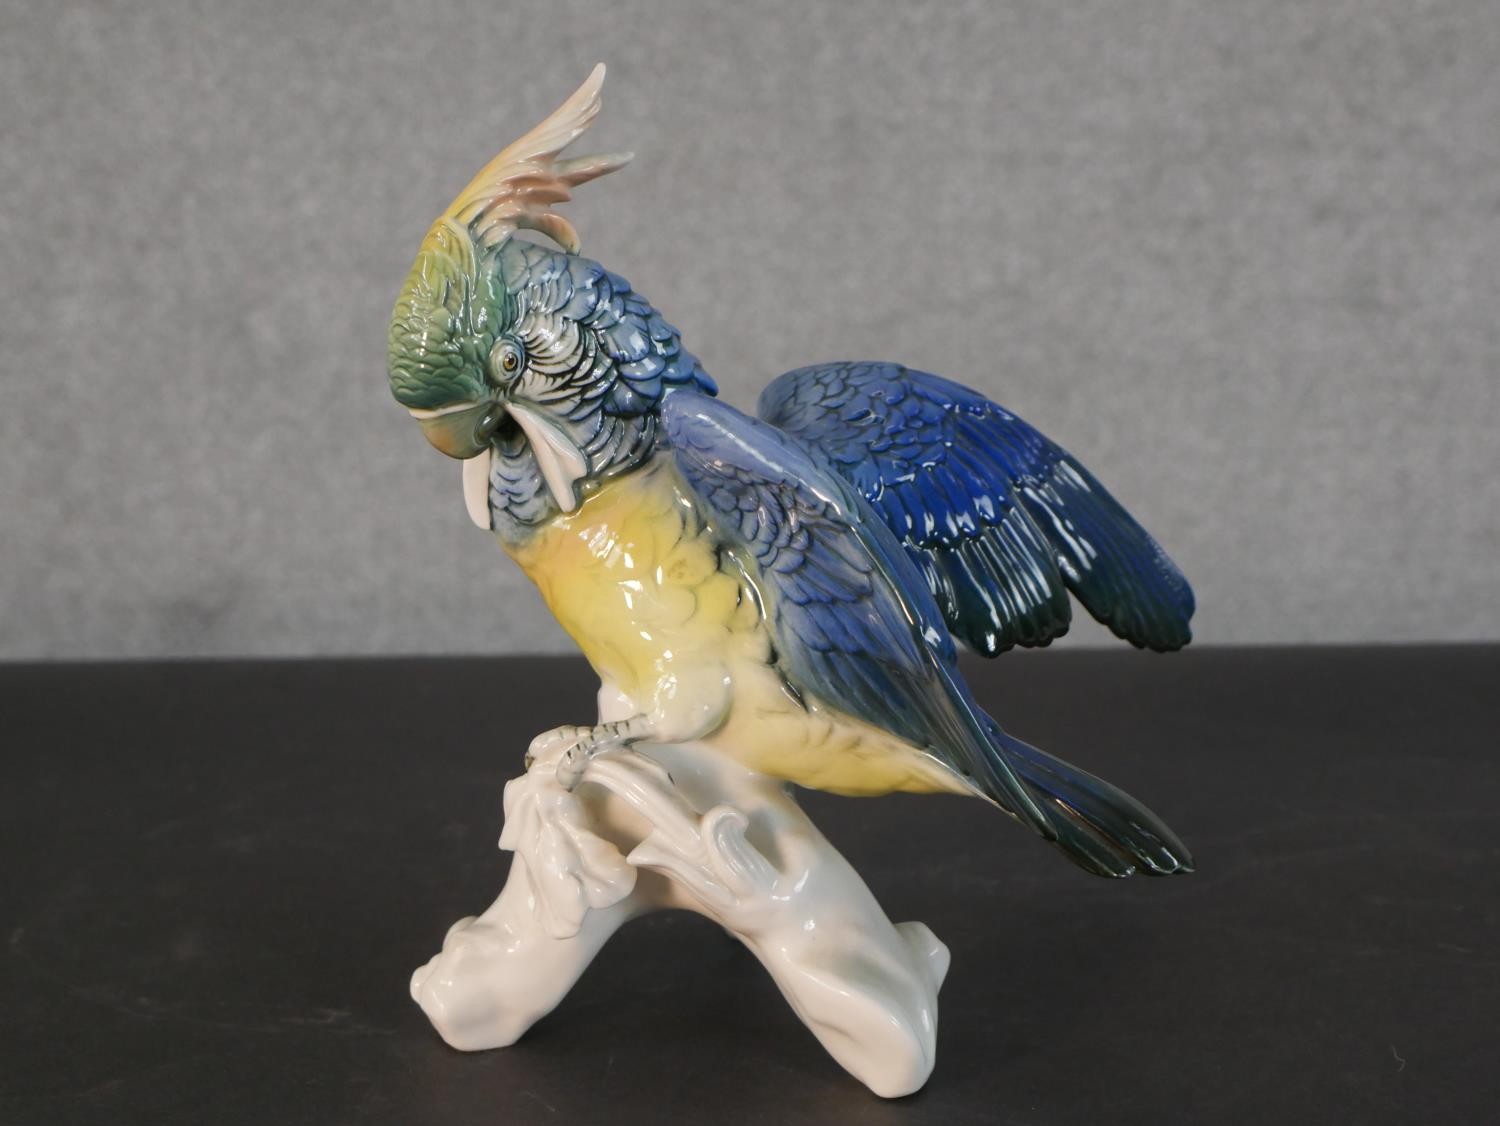 A Karl Ens porcelain blue and yellow parrot perched on a leafy branch, blue printed factory mark